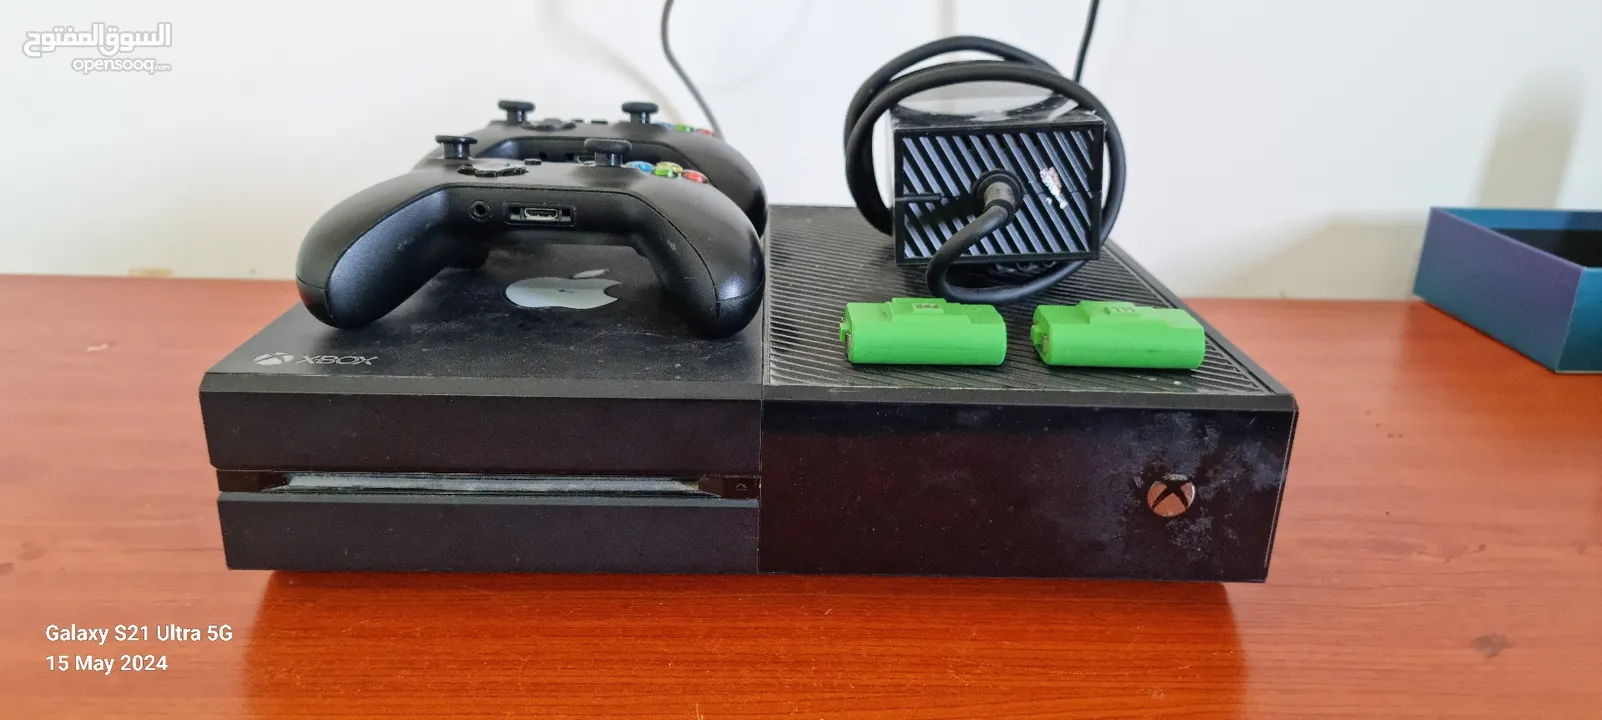 Xbox one with 2 controllers (قابل لي تفاوض بحدود المعقول